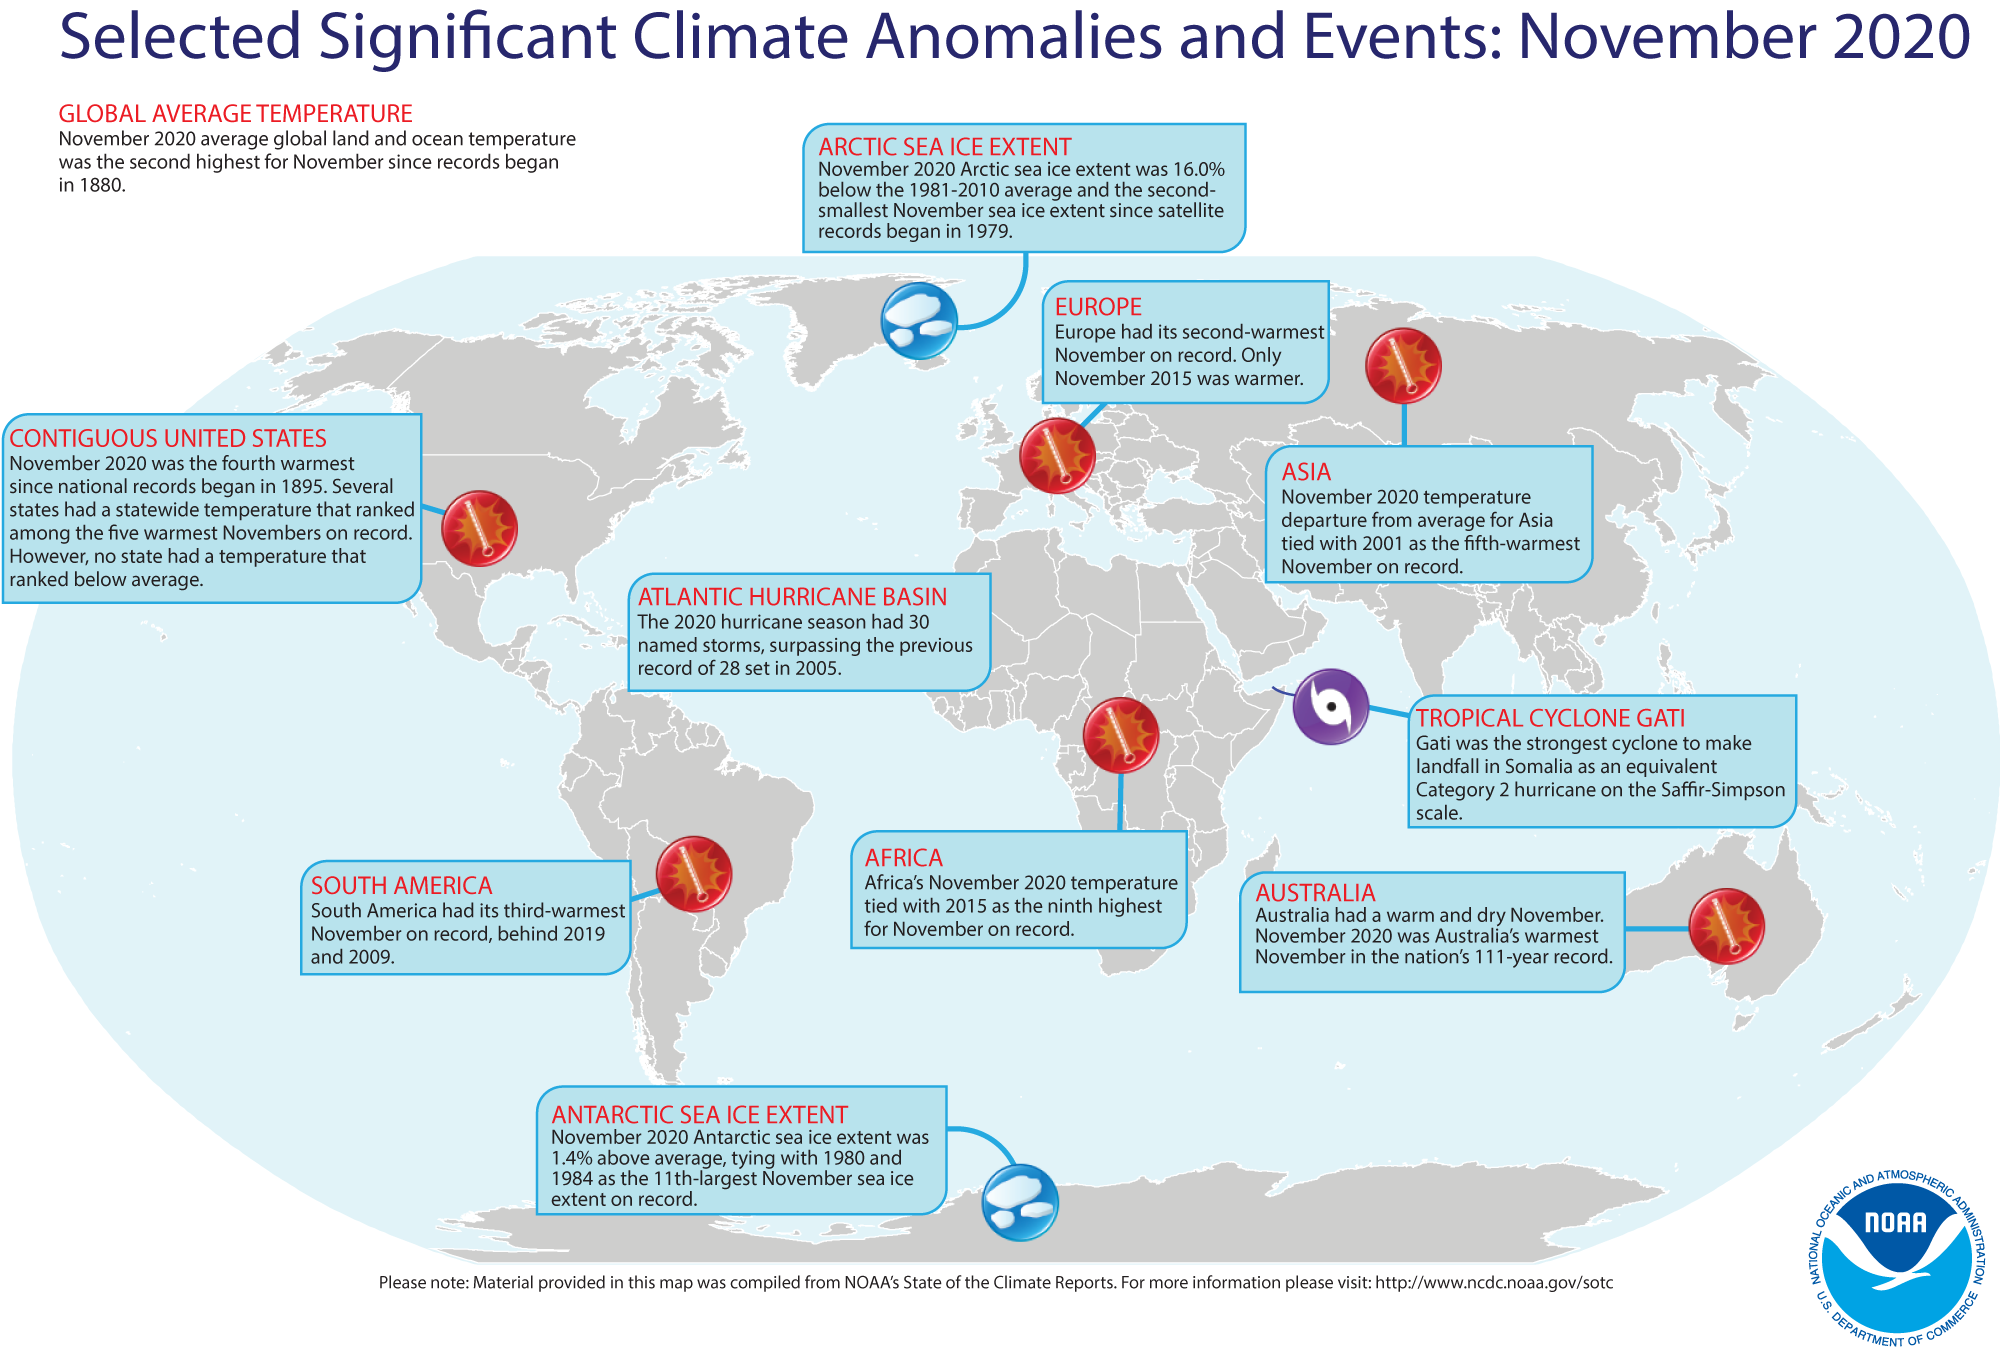 An annotated map of the world showing notable climate and weather events that occurred during November 2020. For text details, please visit http://bit.ly/Global202011.